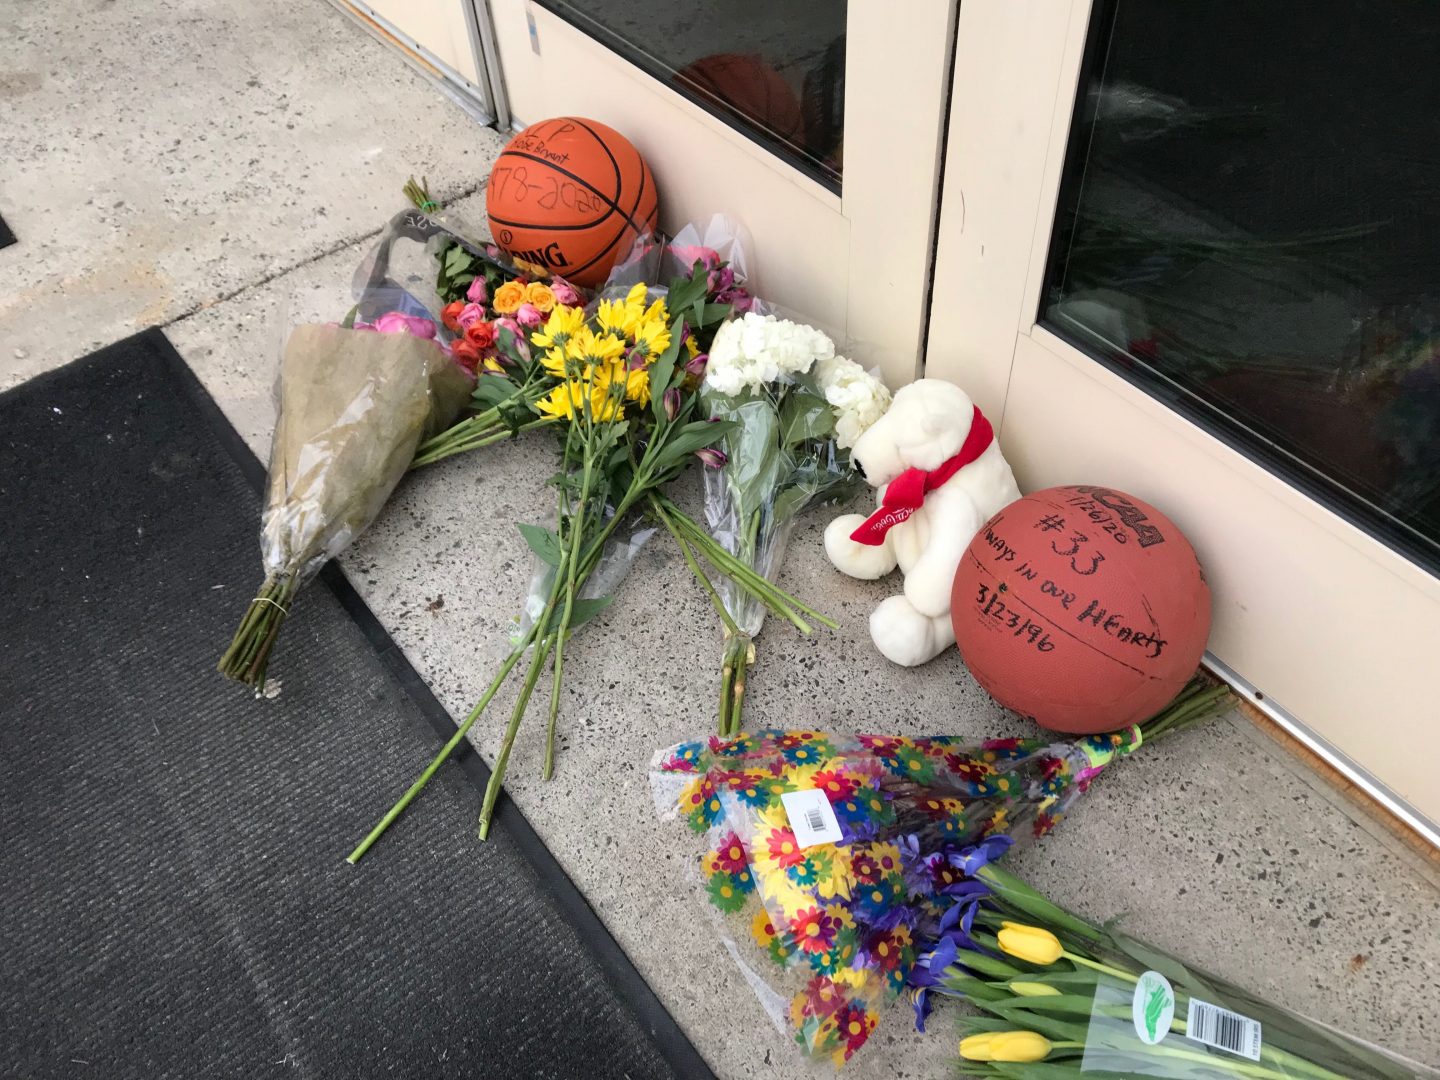 MONTCO Today Writer Shares His Remembrances of the Late Kobe Bryant